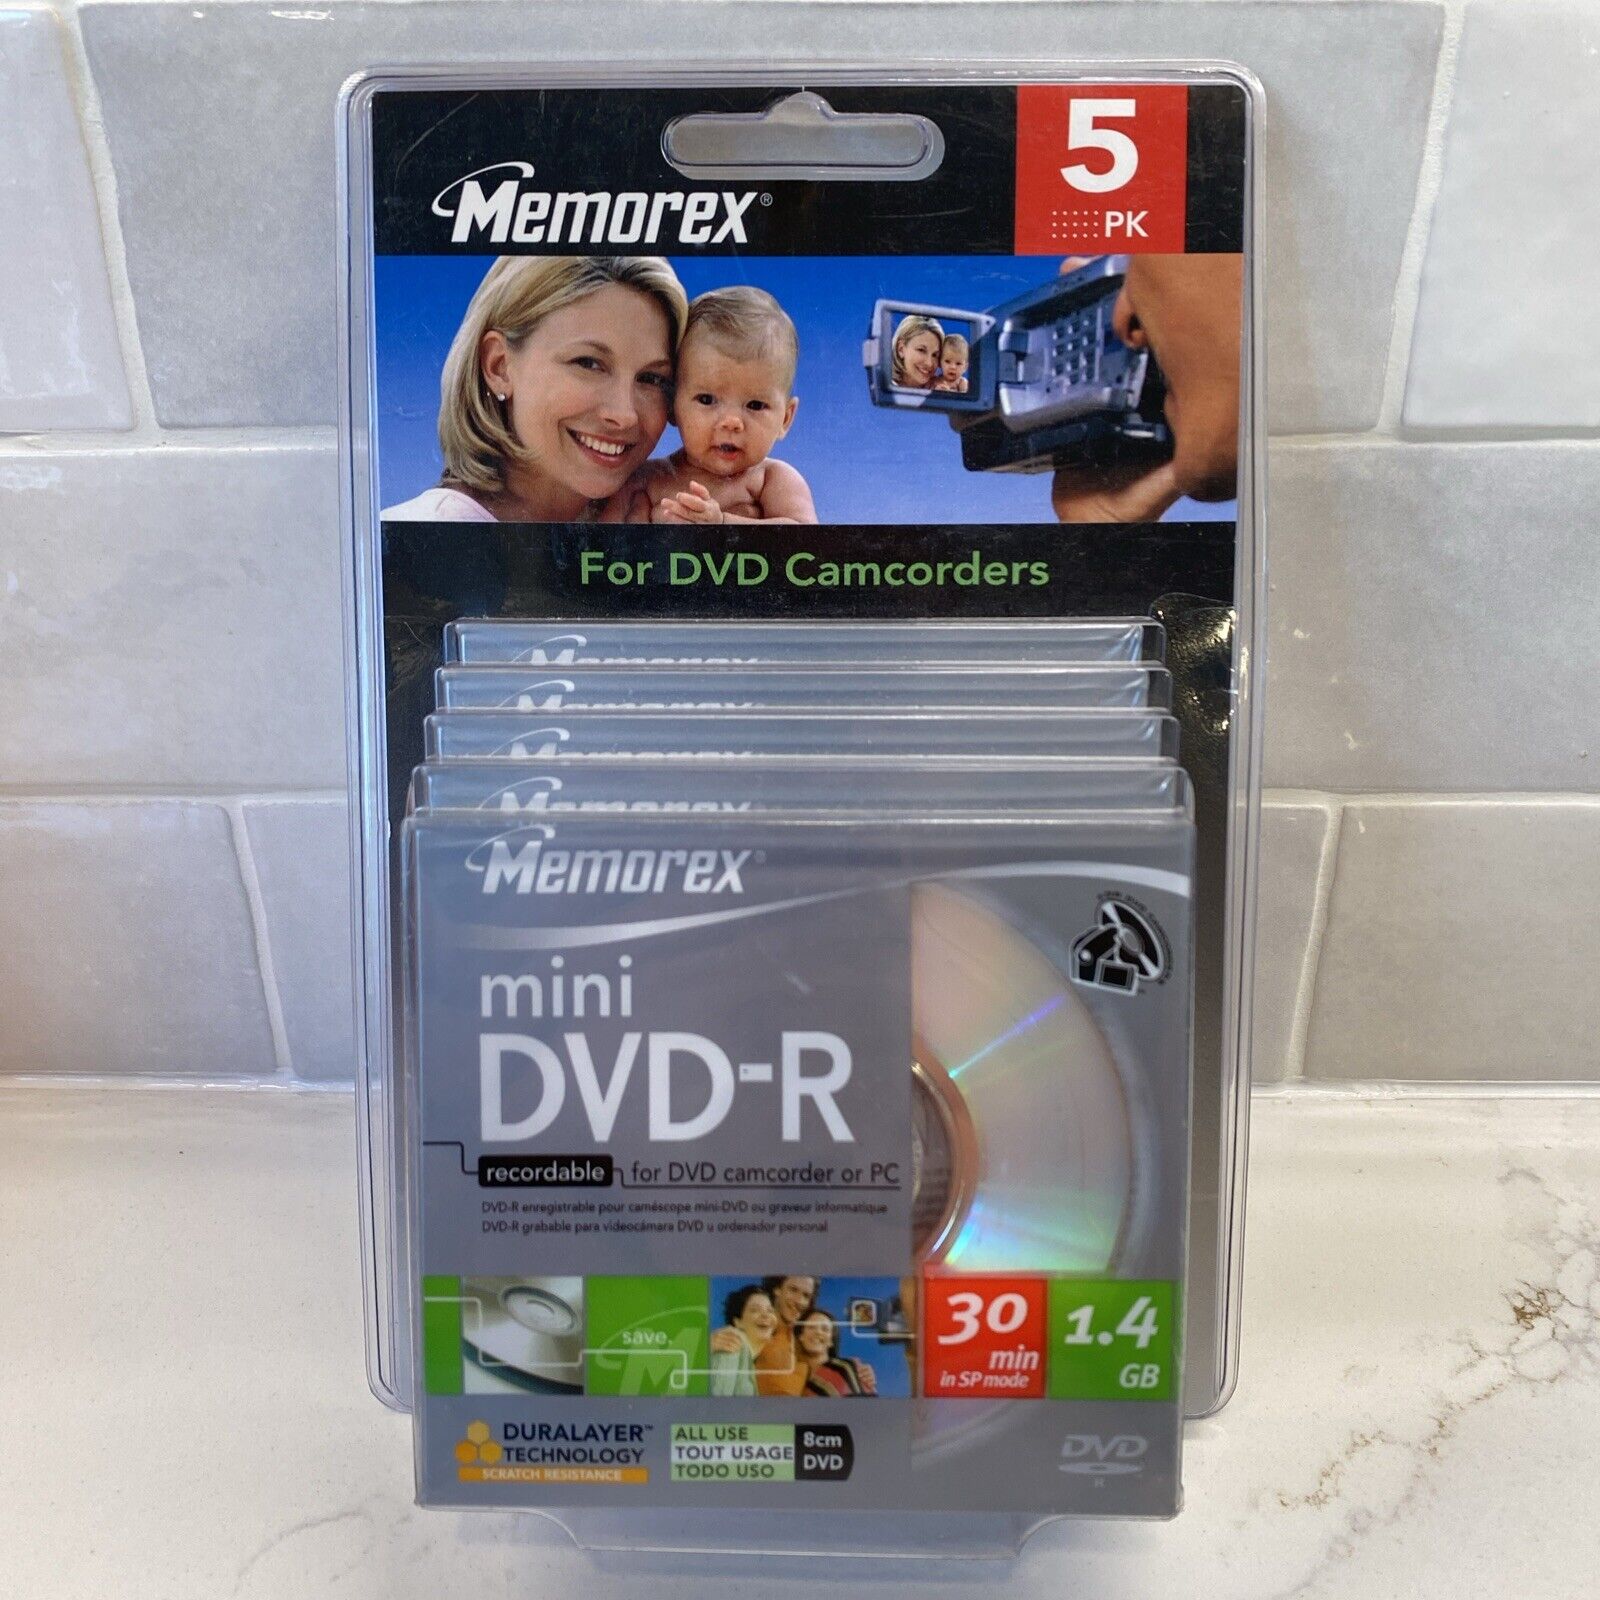 5 Pack Memorex Mini DVD-R 1.4GB 30 Minutes Recordable for Camcorder or PC Sealed